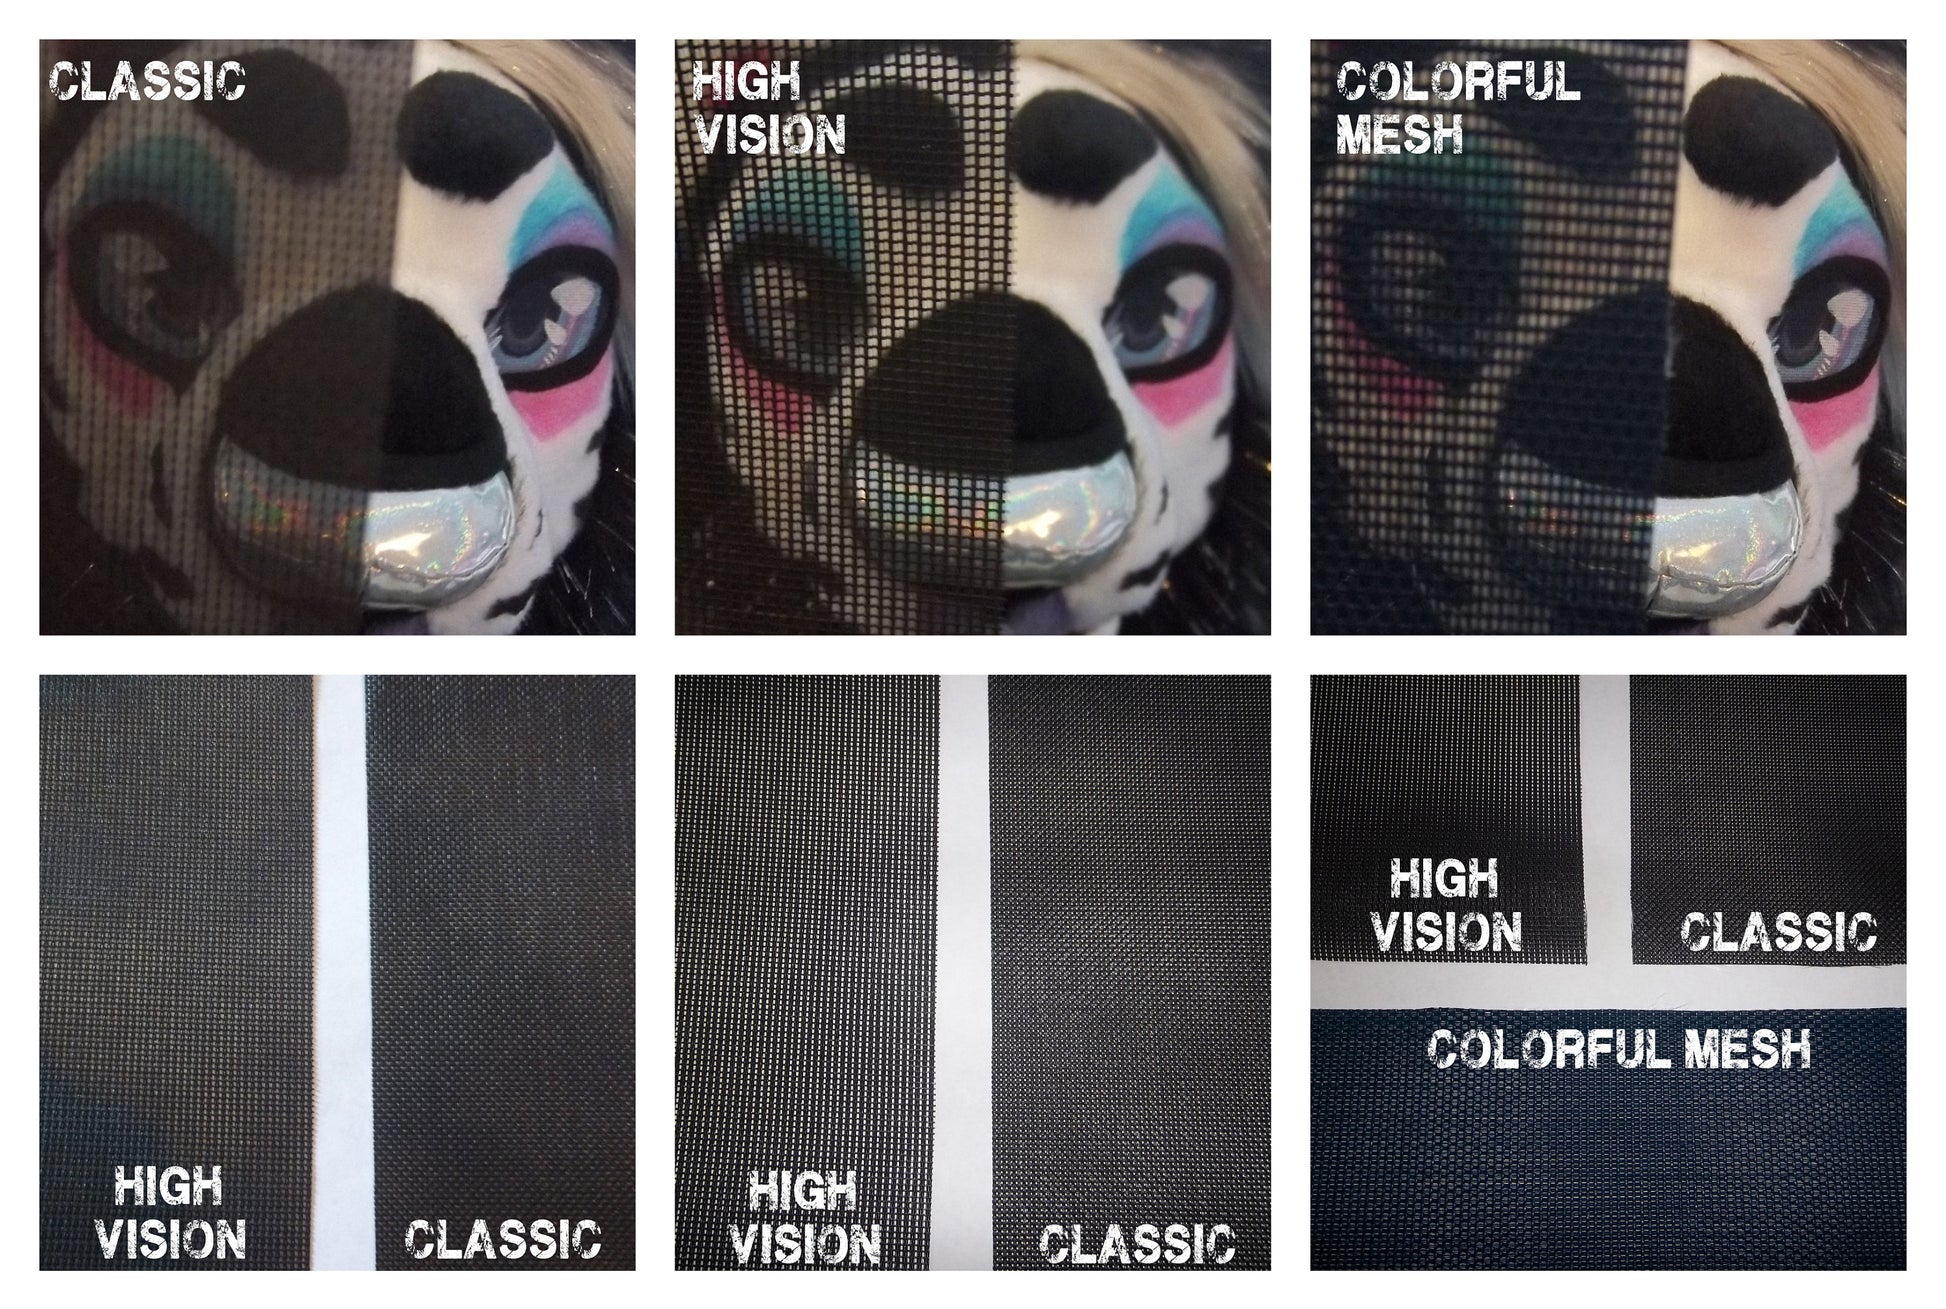 Fursuit / Costume Eye Mesh (Lots of Colors!) - Waterproof Durable Canvas / Perforated Mesh - 8.5x11 - NO TRACKING